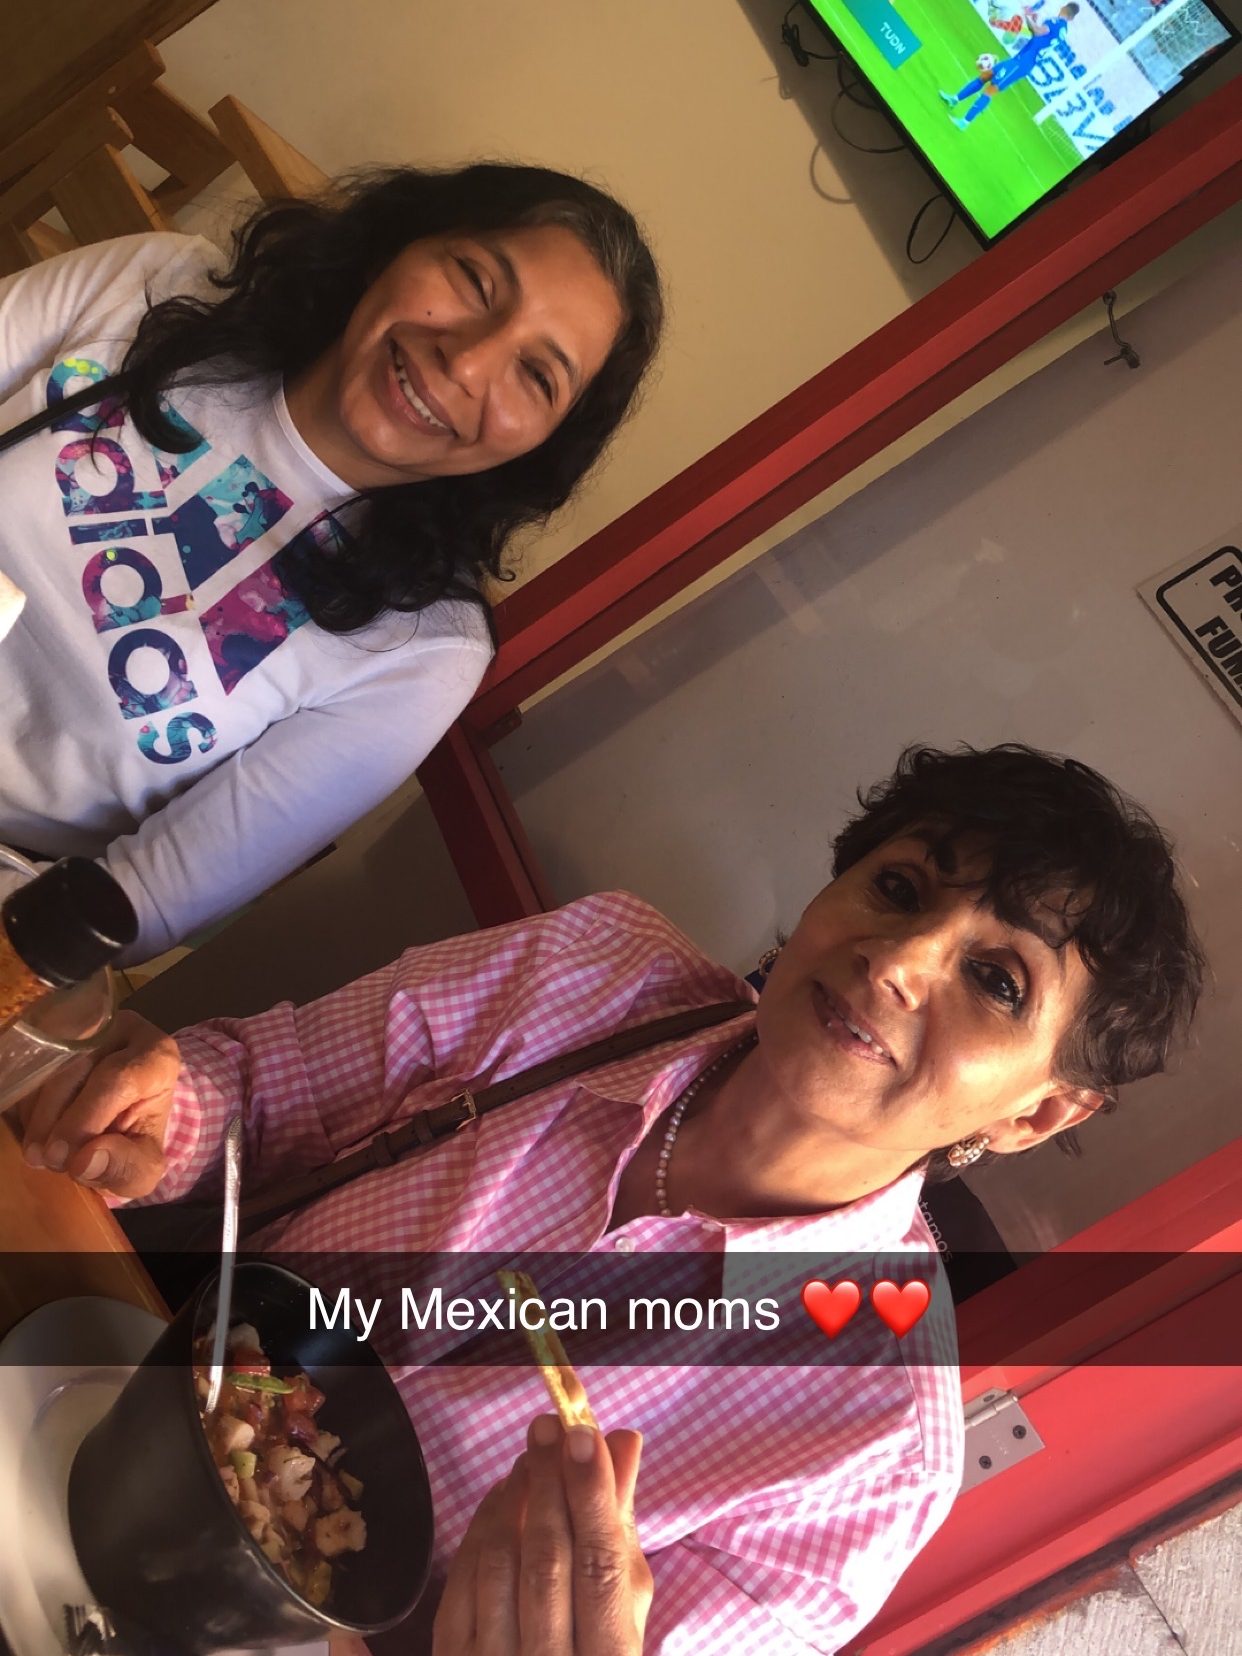 Two women smile at the camera in a Mexican restaurant.